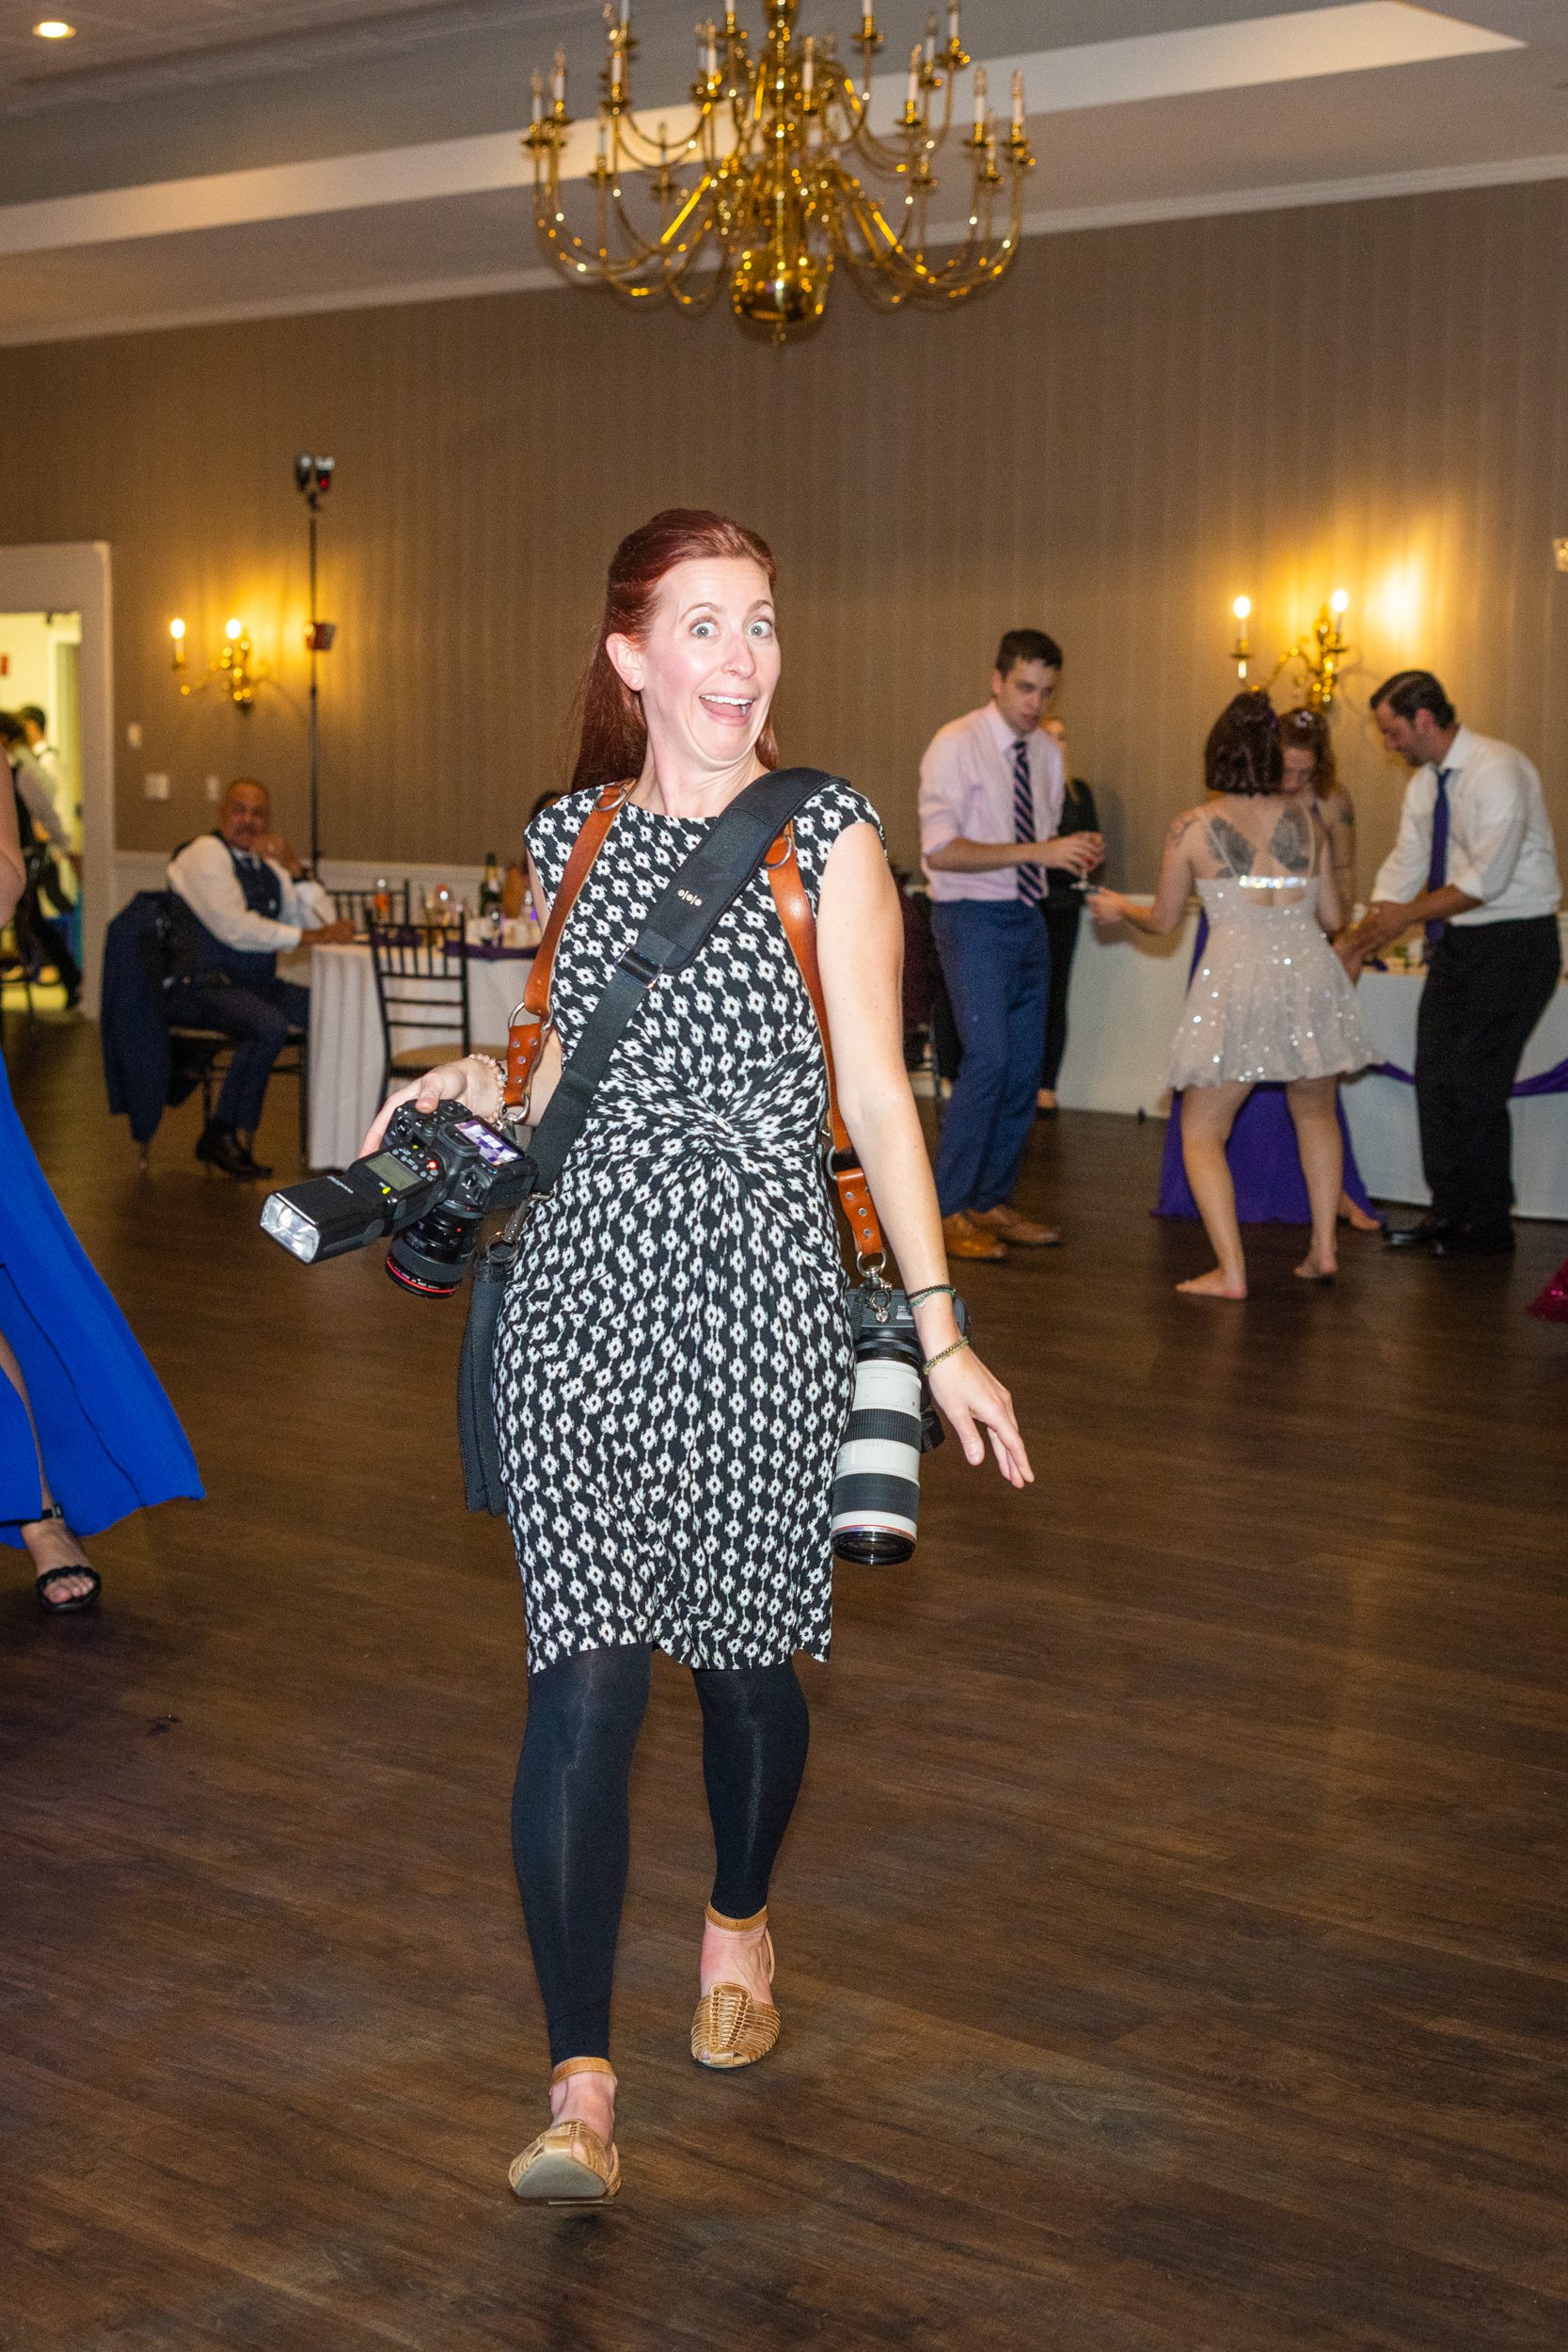 Audrey cutler walking across a dance floor at a wedding carrying two cameras